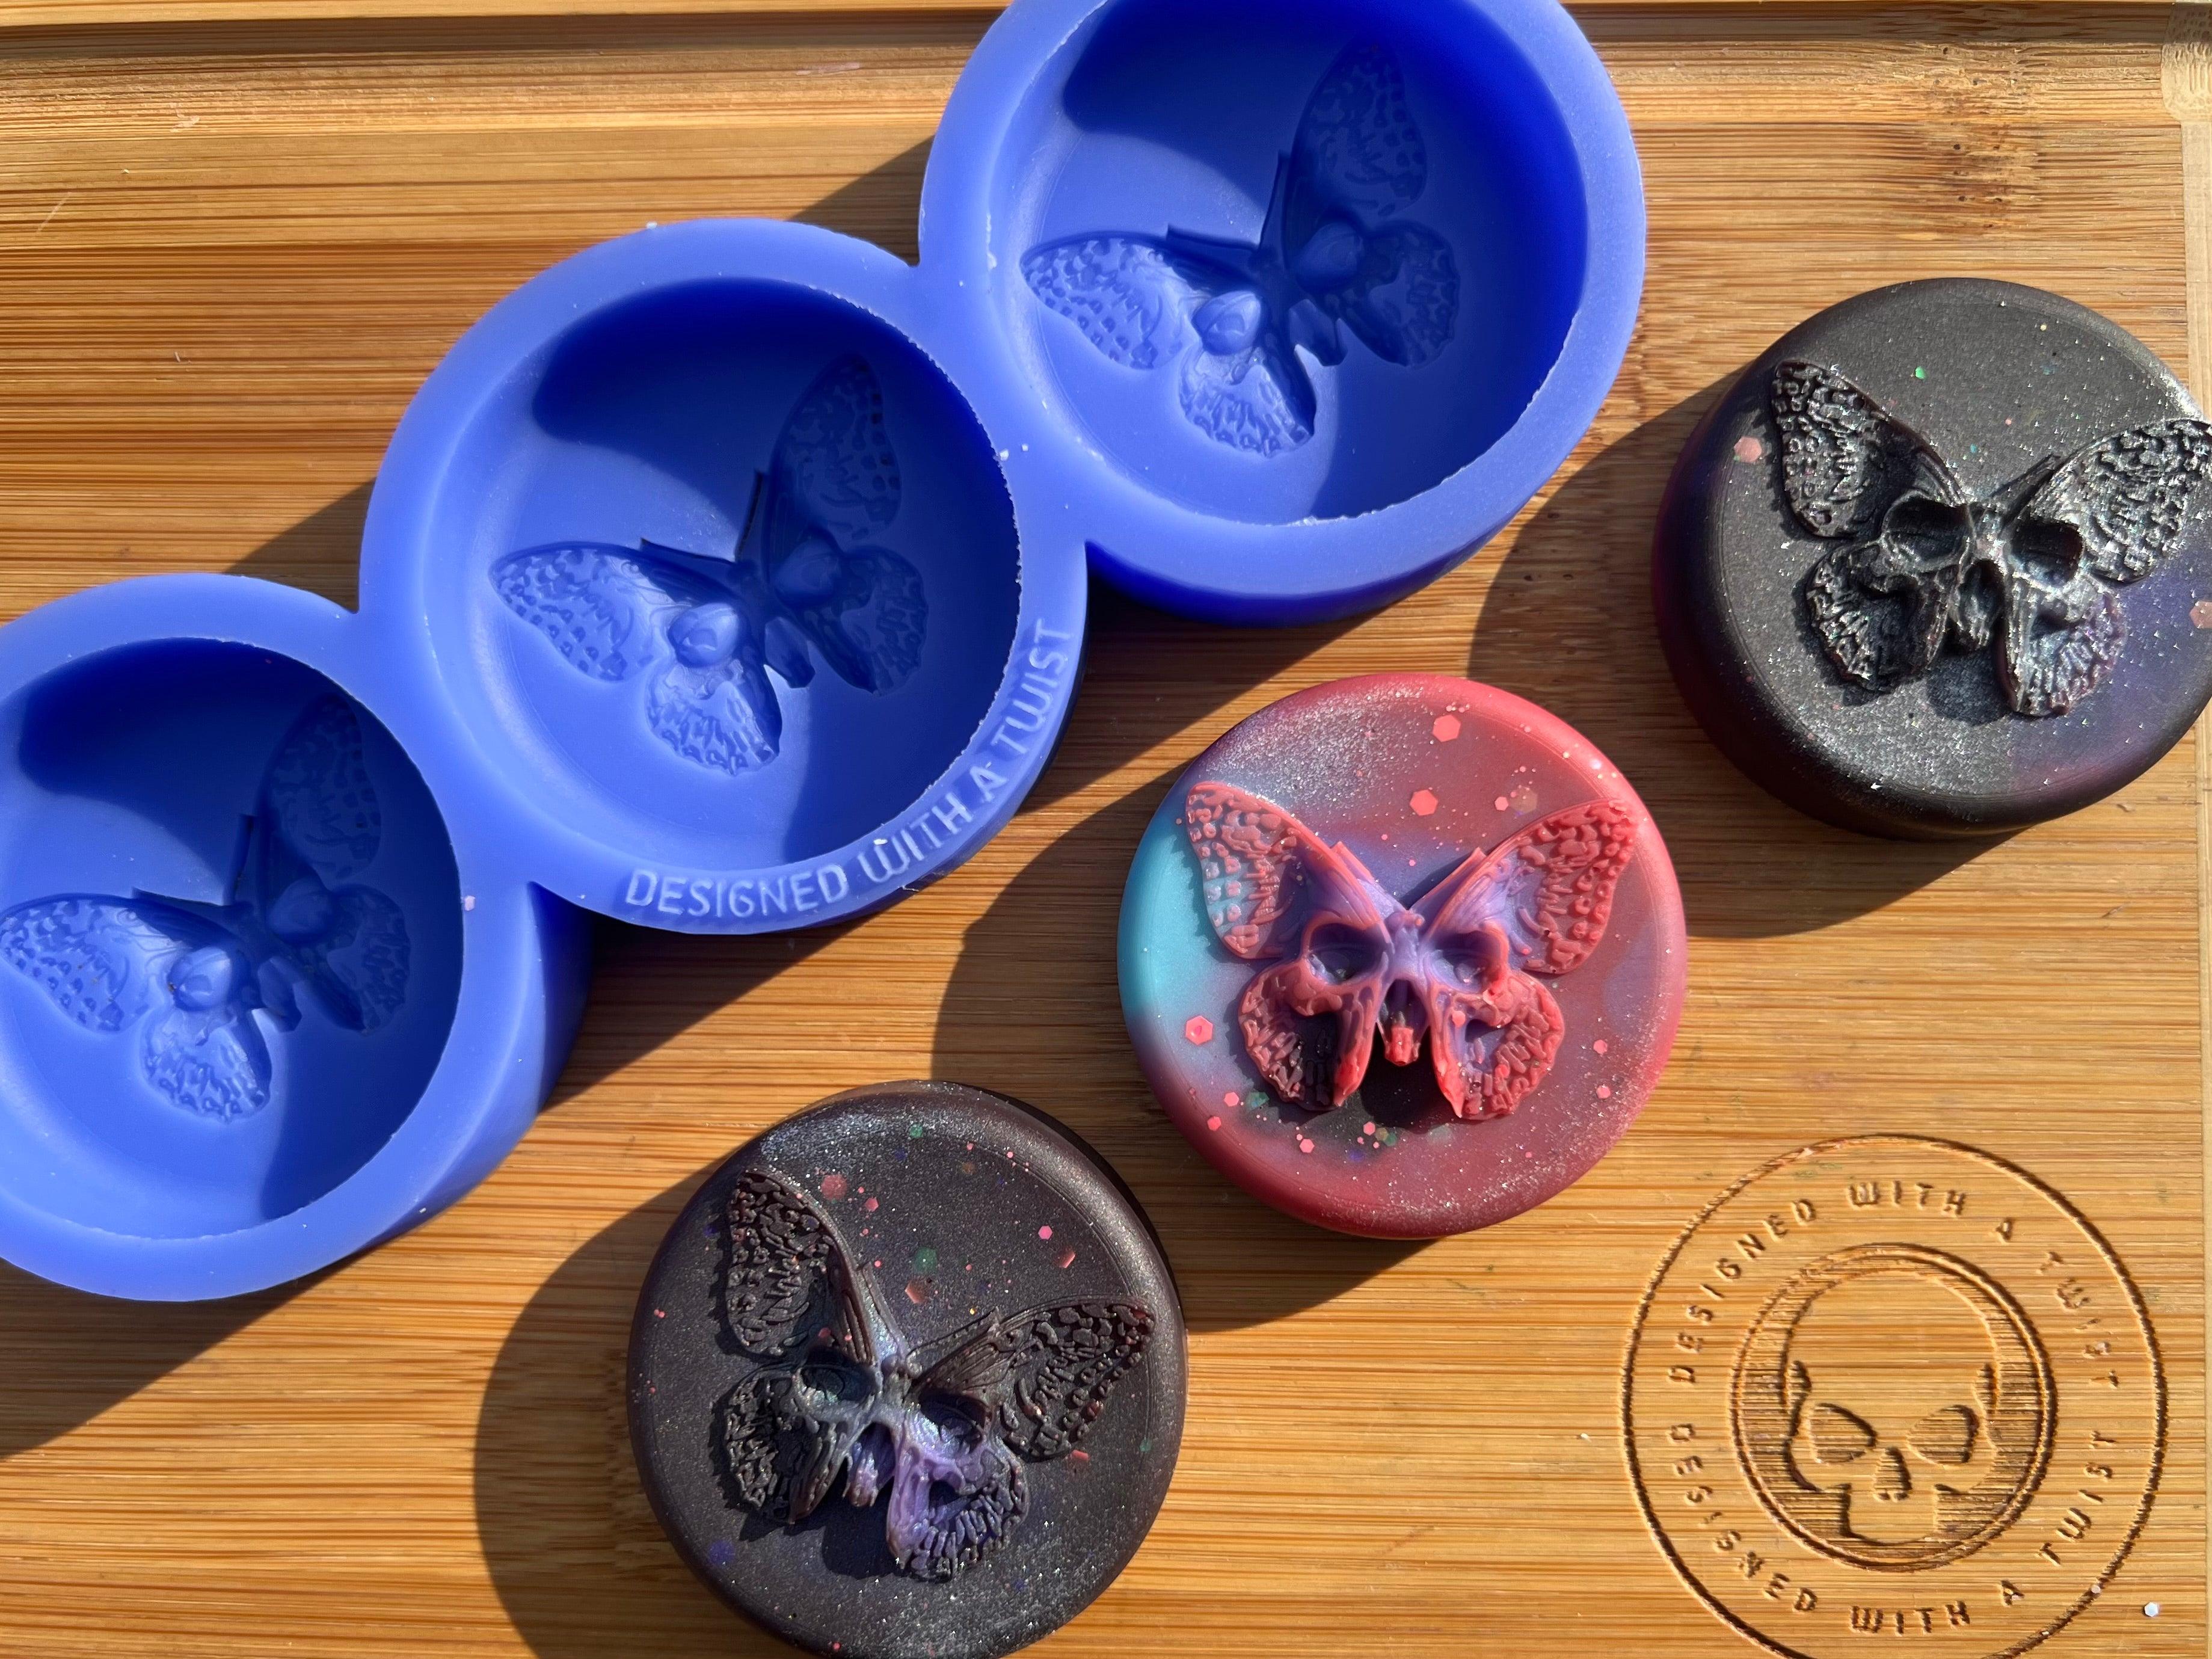 Gothic Butterfly Silicone Mold - Designed with a Twist - Top quality silicone molds made in the UK.